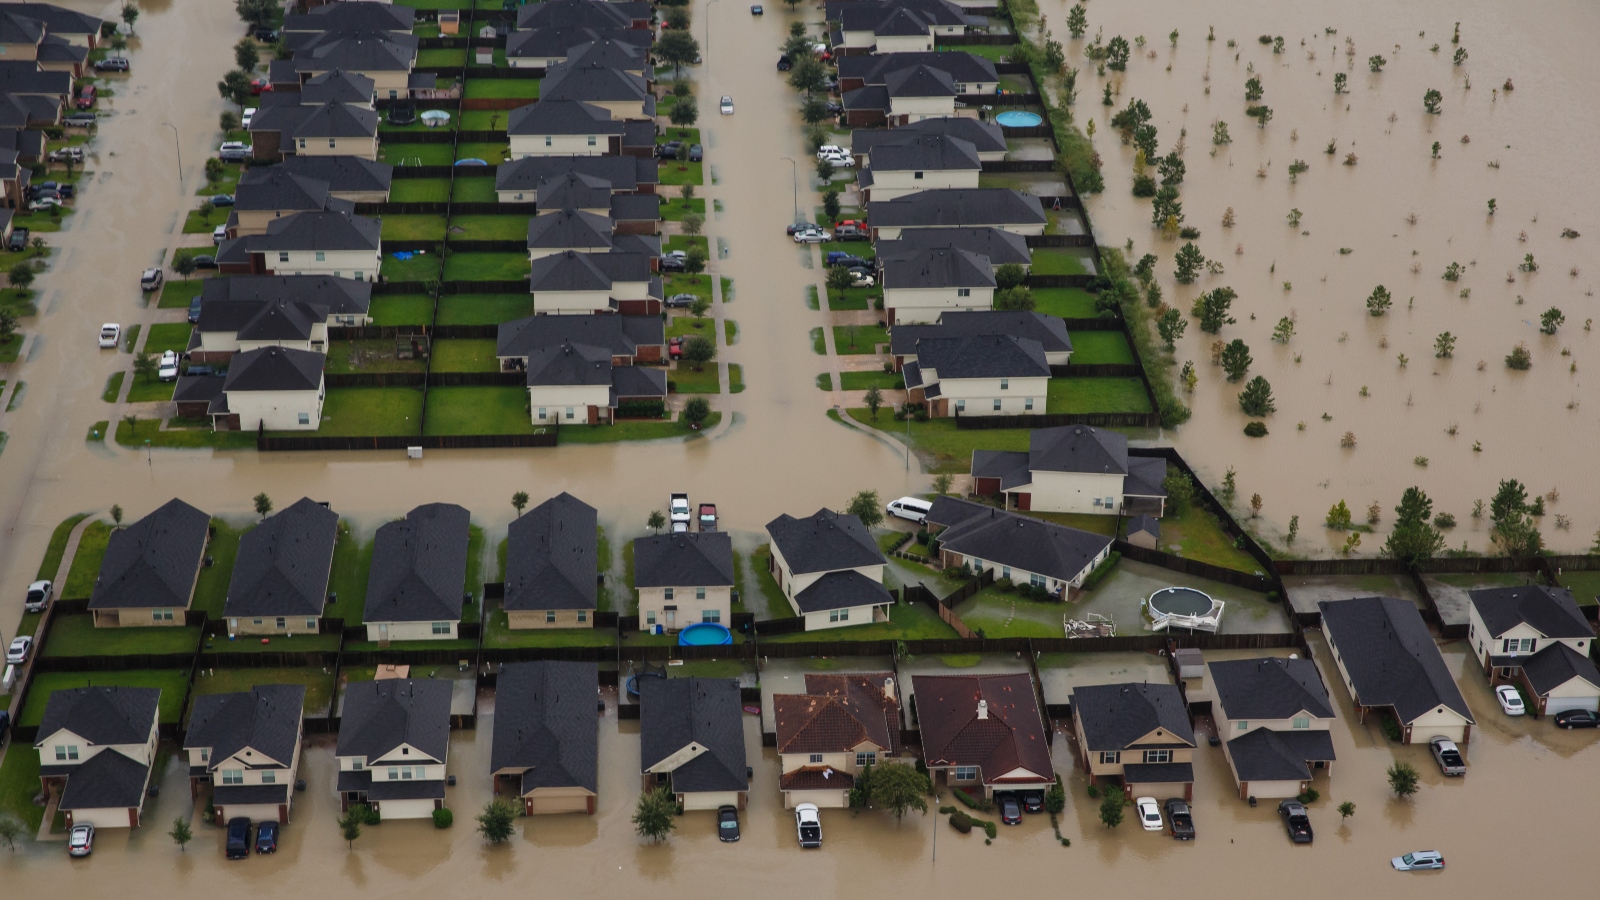 Residential neighborhoods near the Interstate 10 sit in floodwater in the wake of Hurricane Harvey.